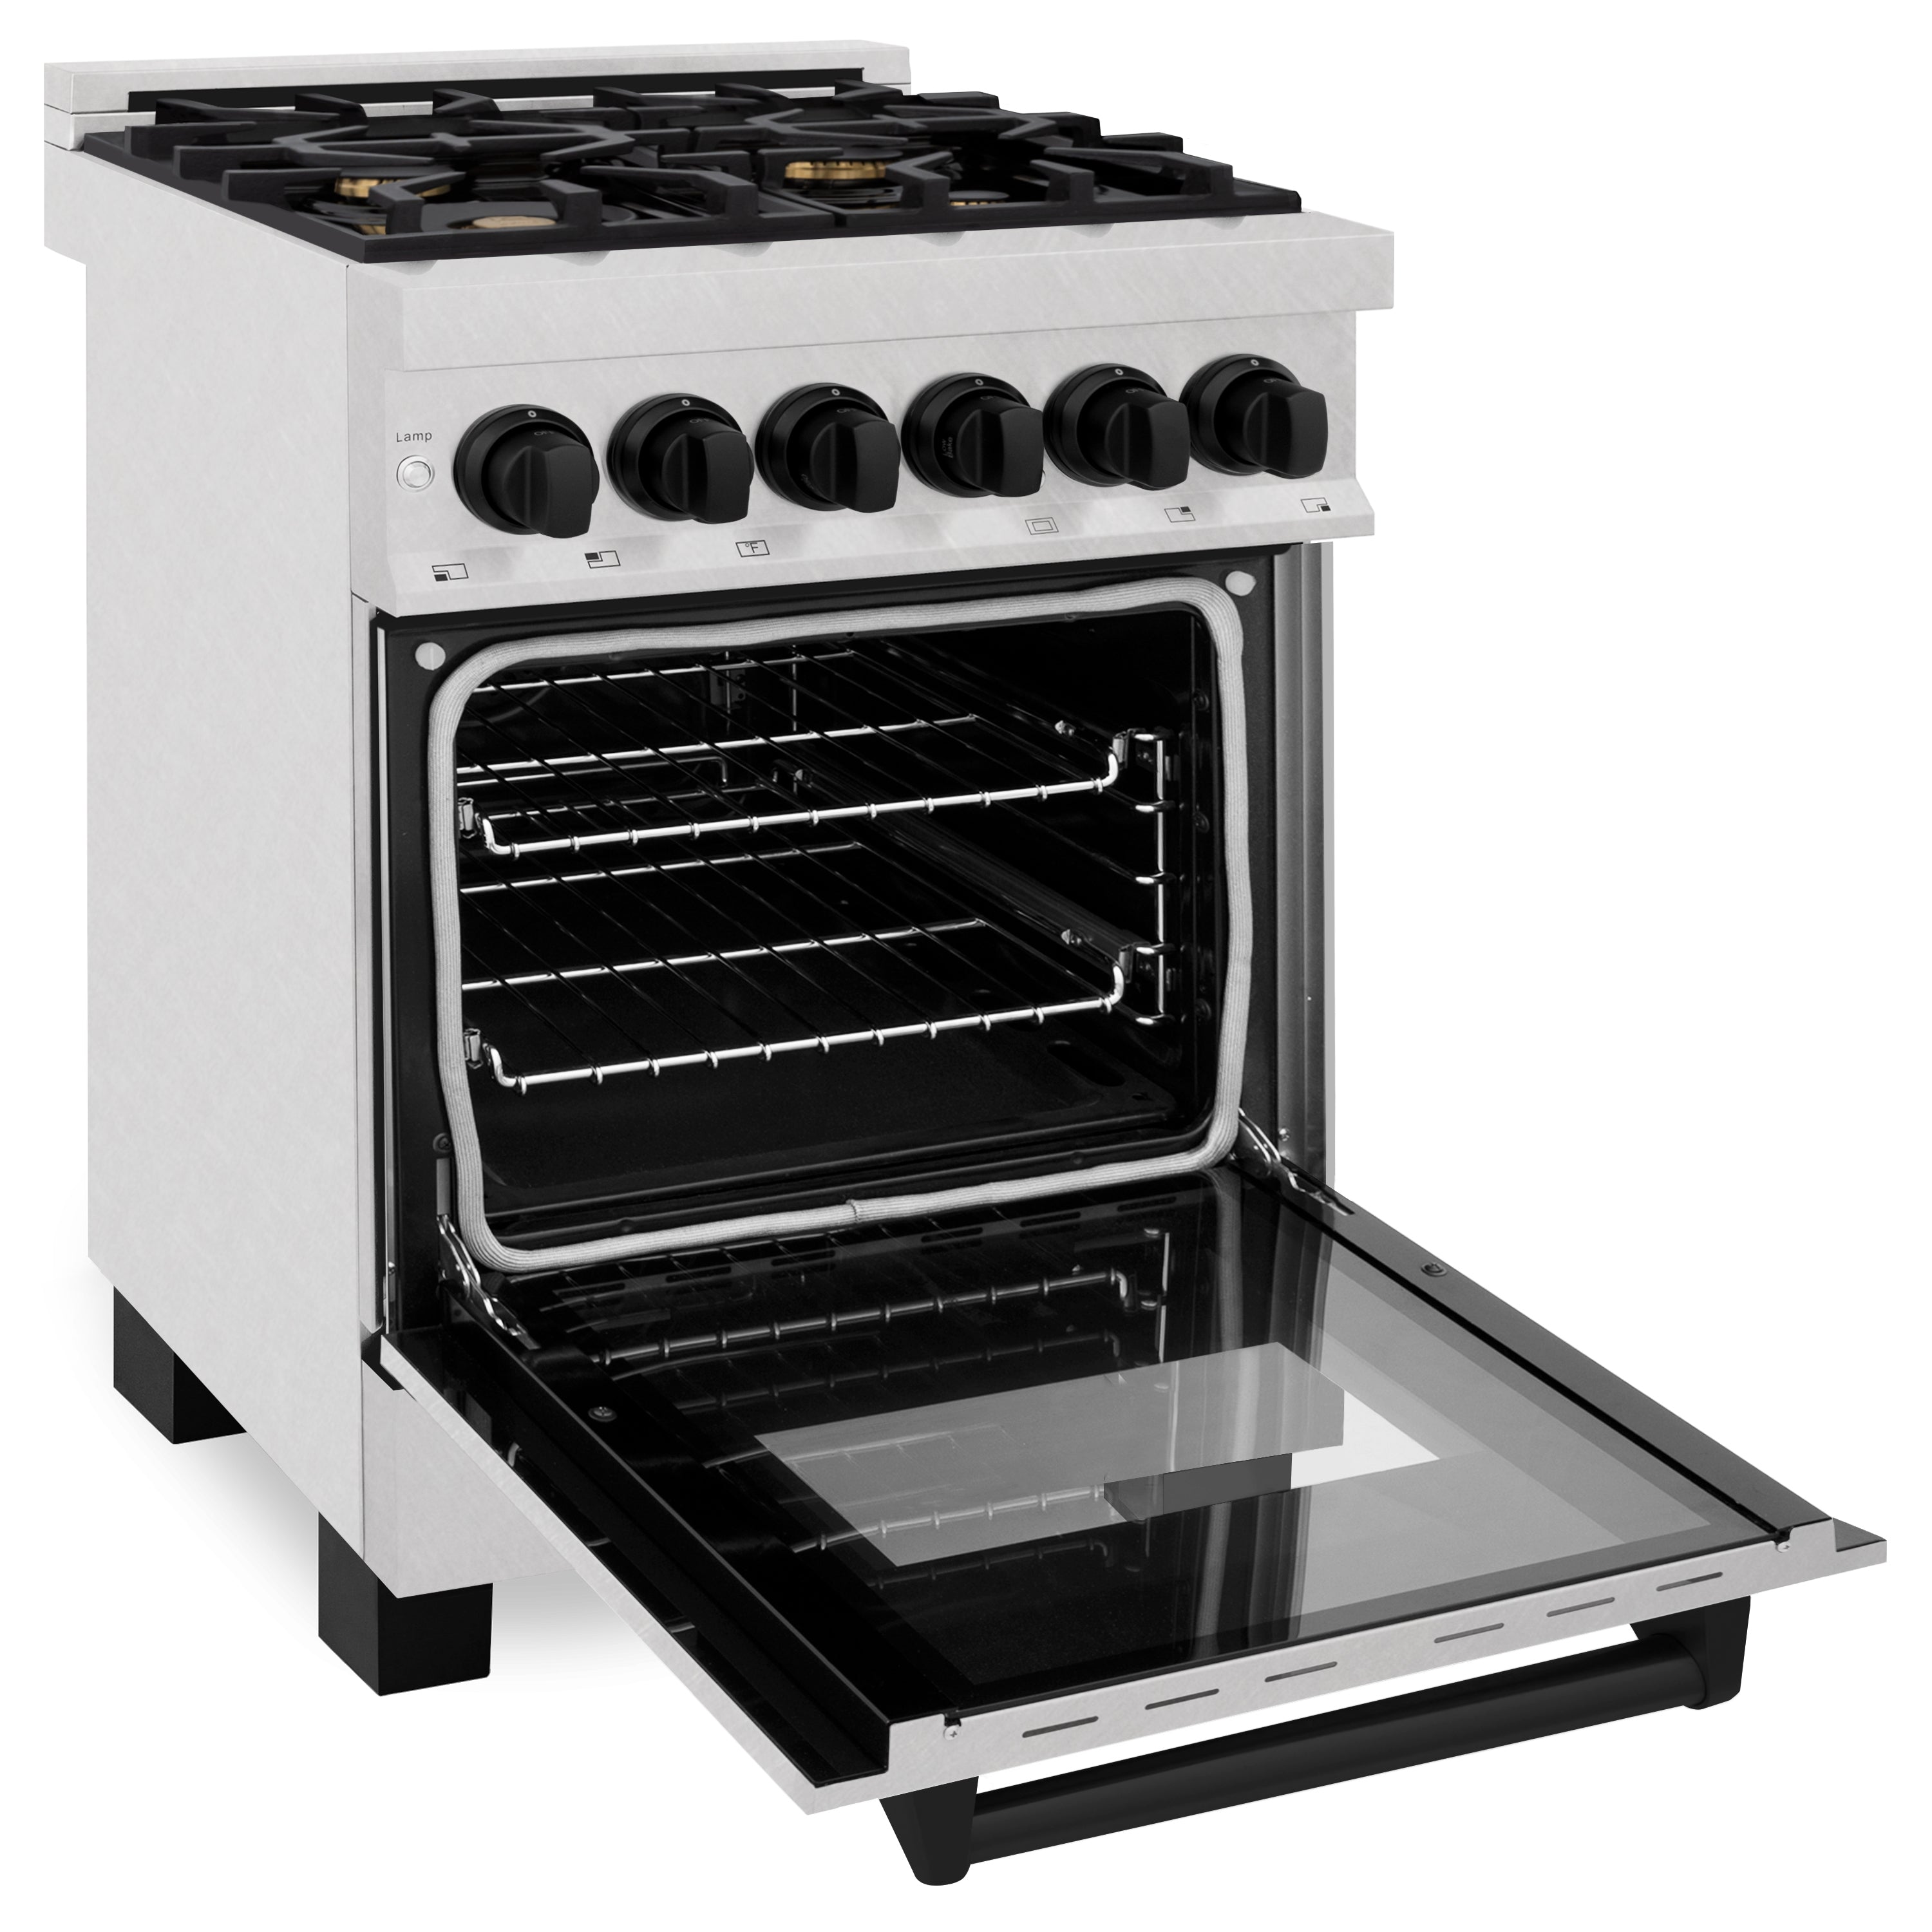 ZLINE Autograph Edition 24" 2.8 cu. ft. Dual Fuel Range with Gas Stove and Electric Oven in DuraSnow® Stainless Steel with Matte Black Accents (RASZ-SN-24-MB)